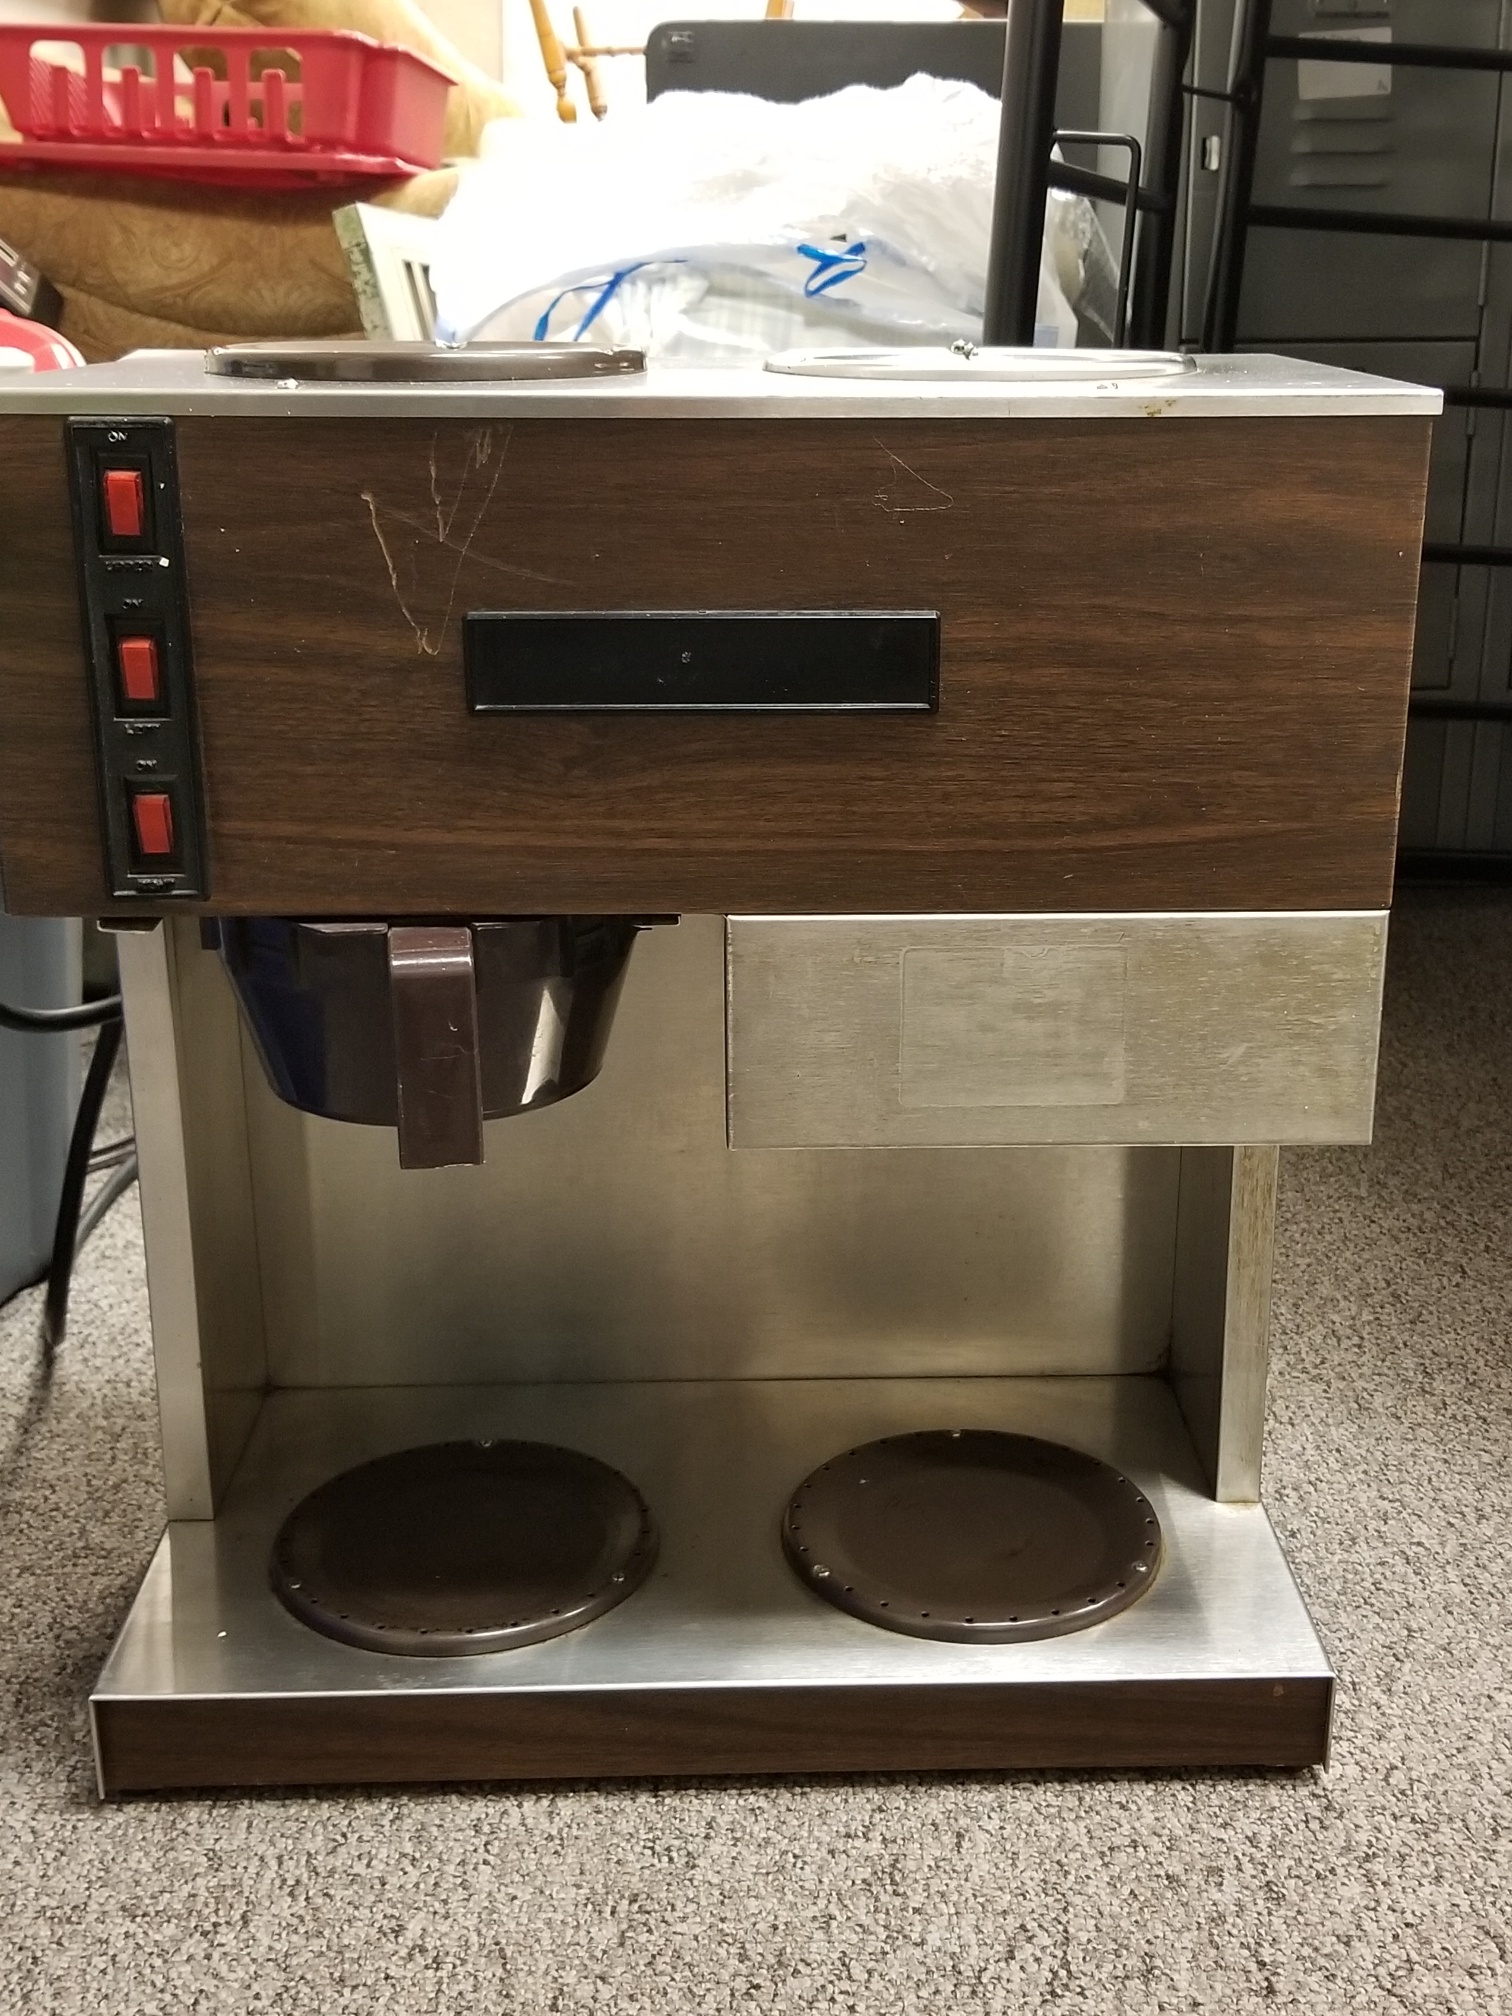 Commercial 2 Pot Coffee Maker